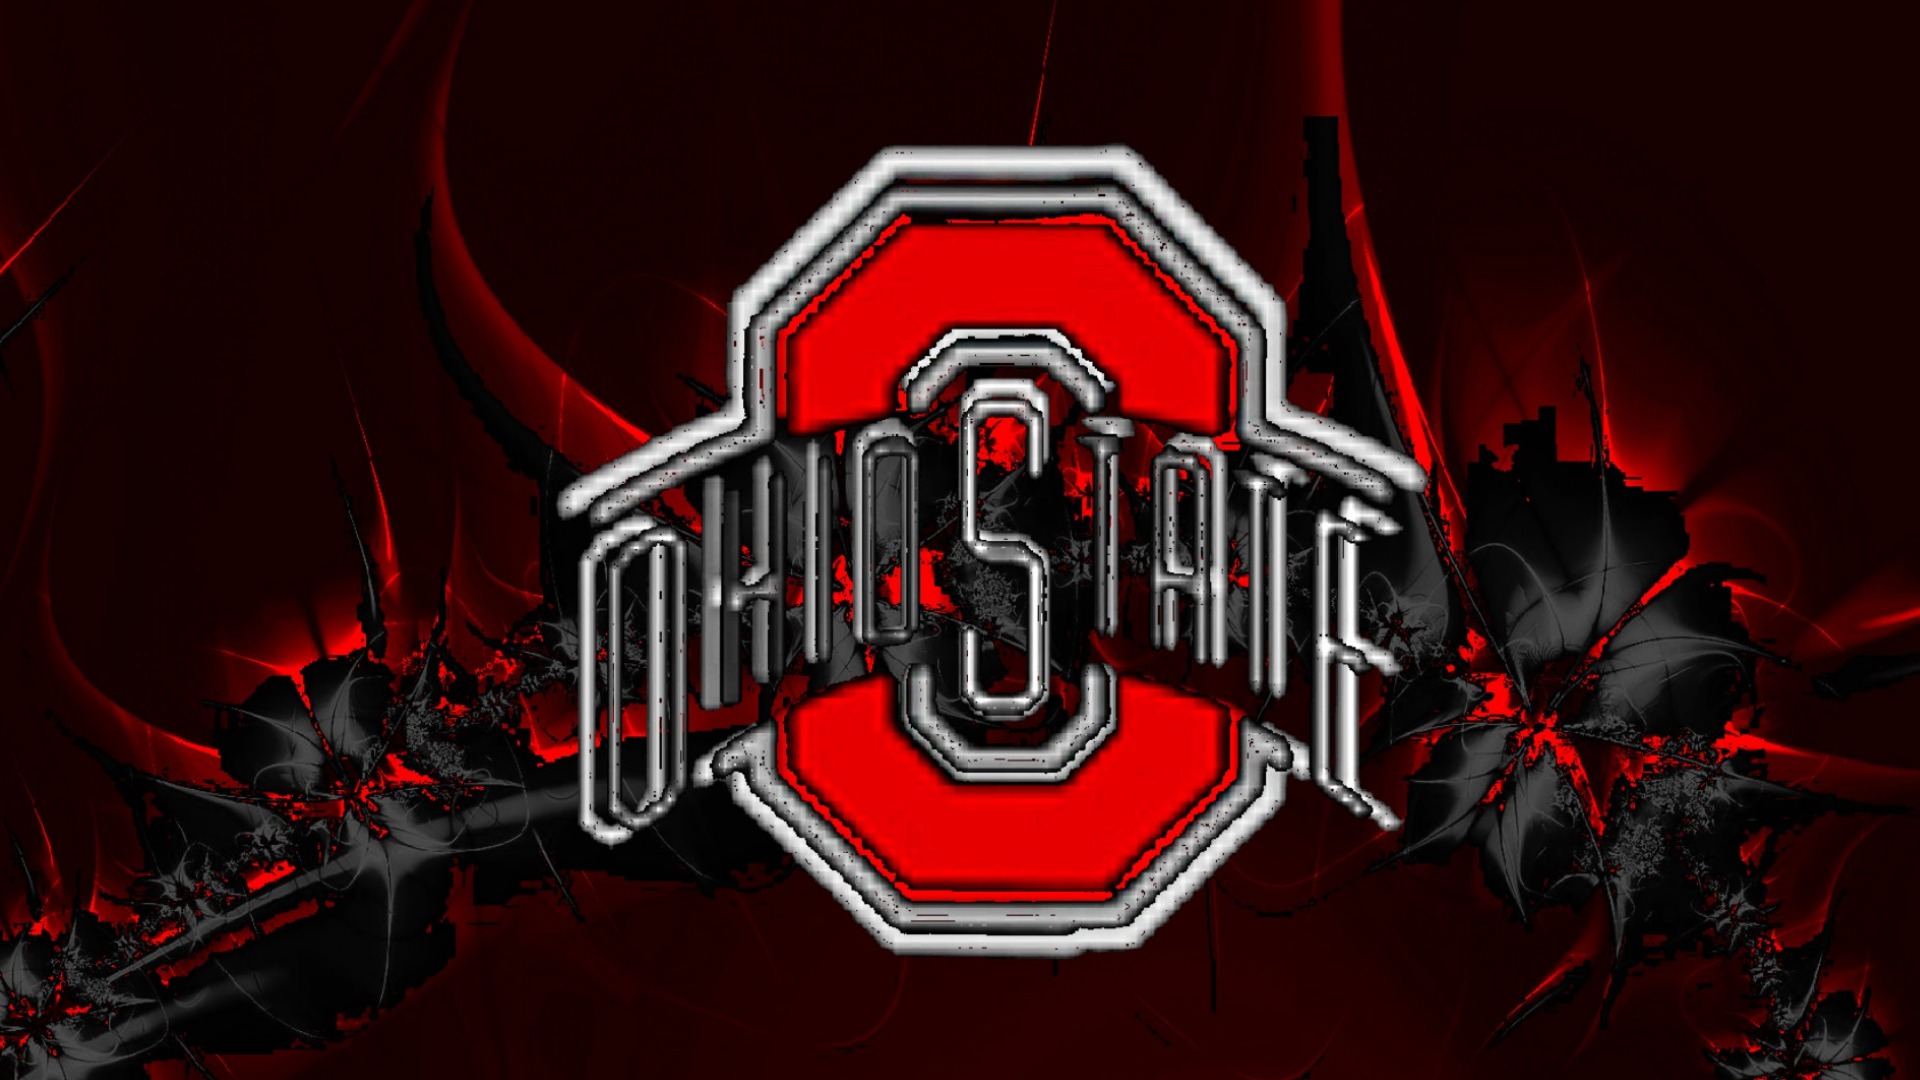 Ohio State iPhone Wallpaper Best Auto Res